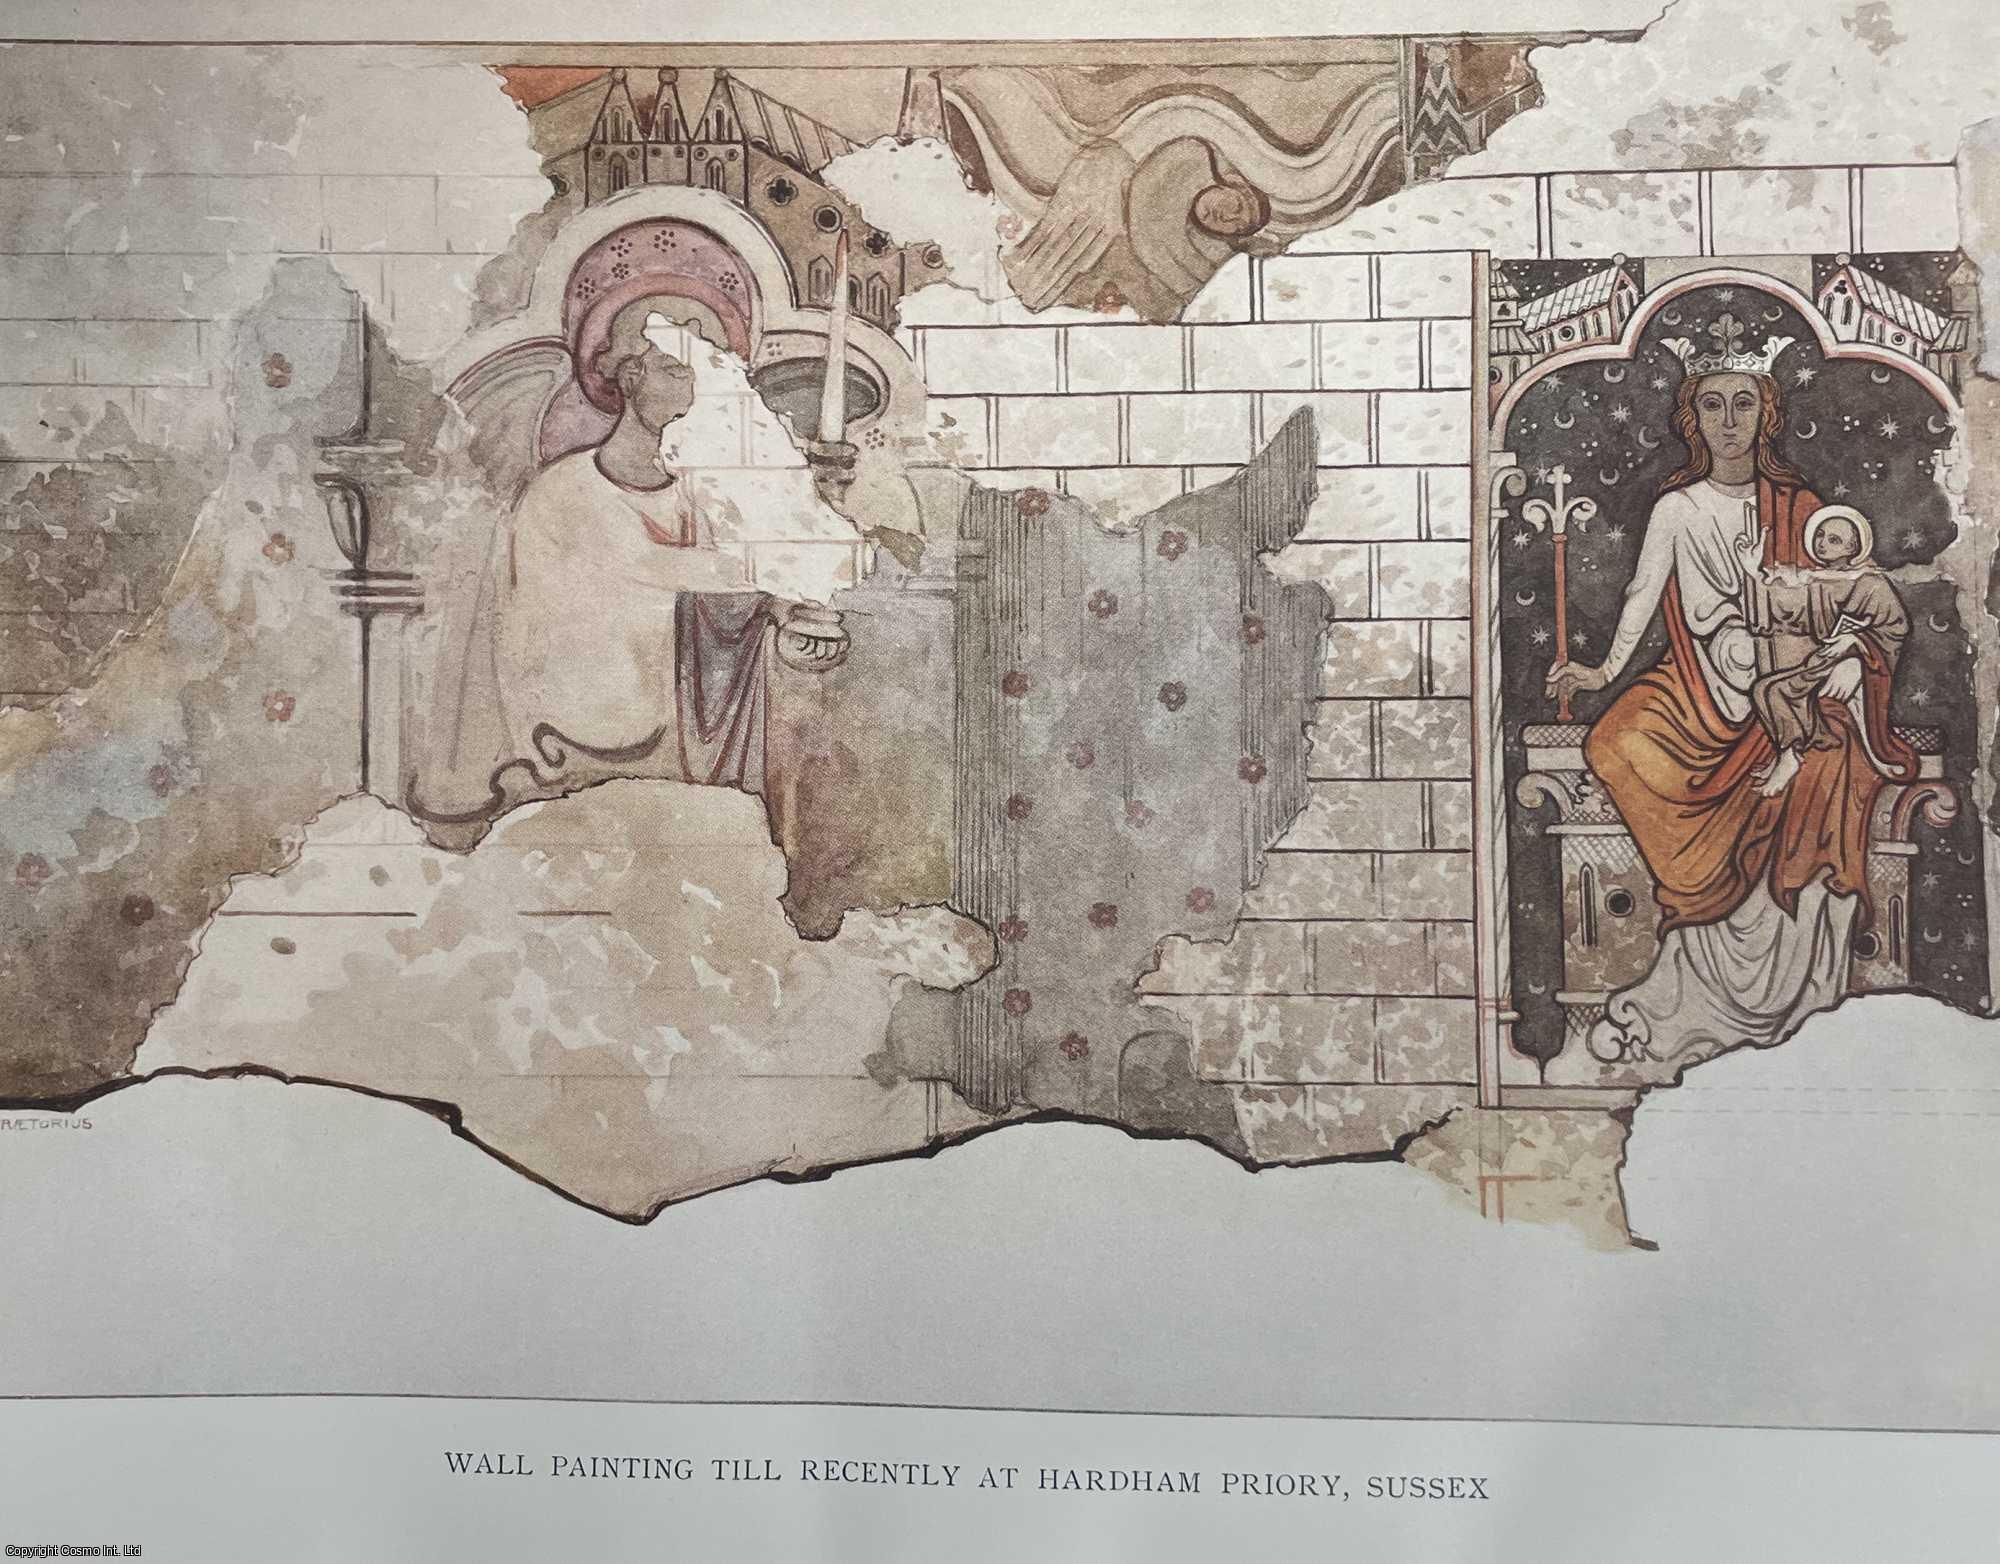 C.J. Praetorius, Esq., F.S.A. - On a Wall-painting till recently at Hardham Priory, Sussex. A rare original article from the journal Archaeologia, 1912.